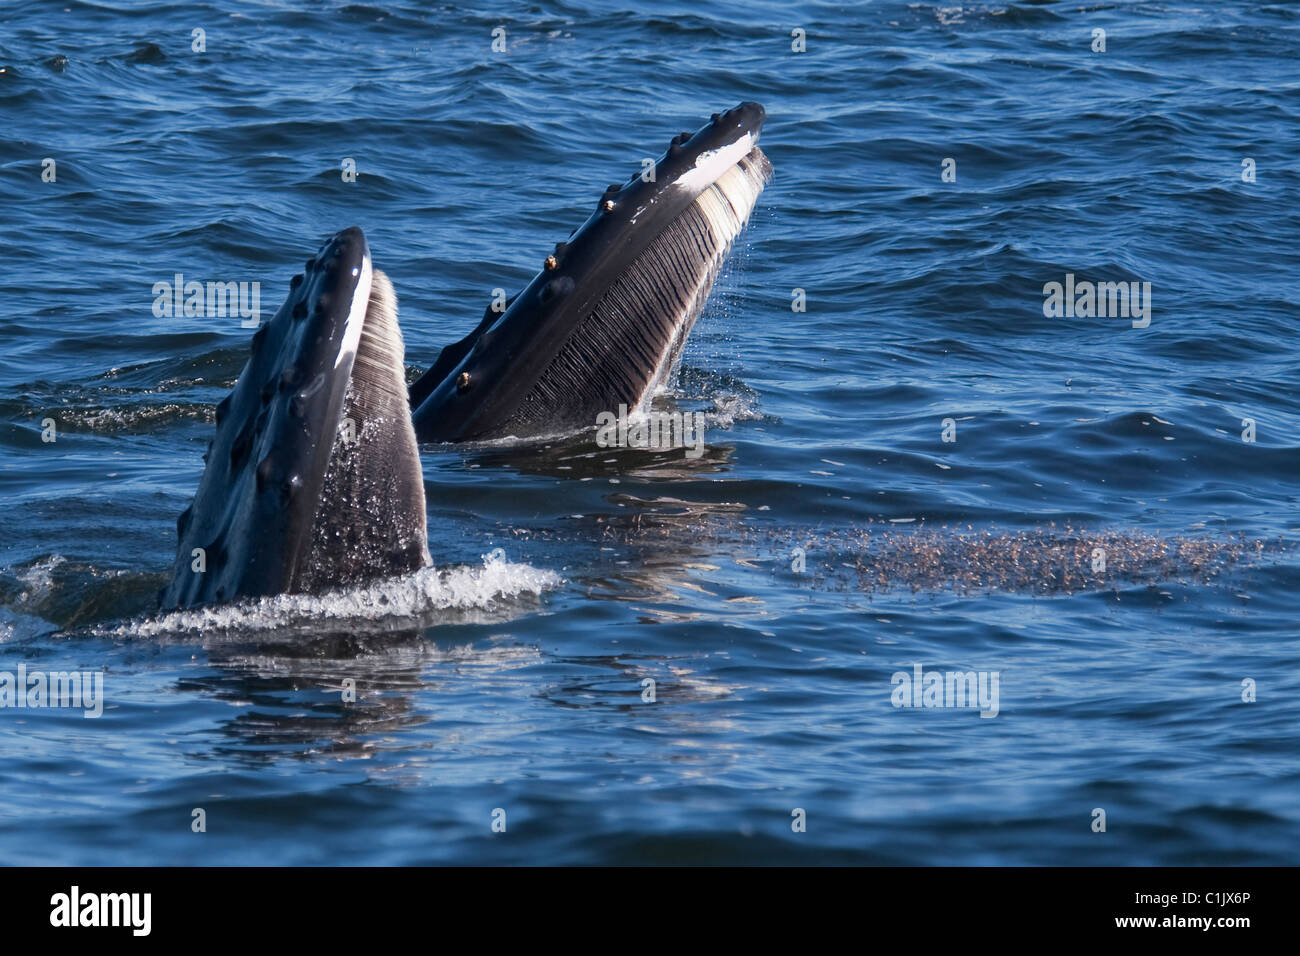 Two Humpback Whales (Megaptera novaeangliae) lunge-feeding on Krill. Monterey, California, Pacific Ocean. Stock Photo